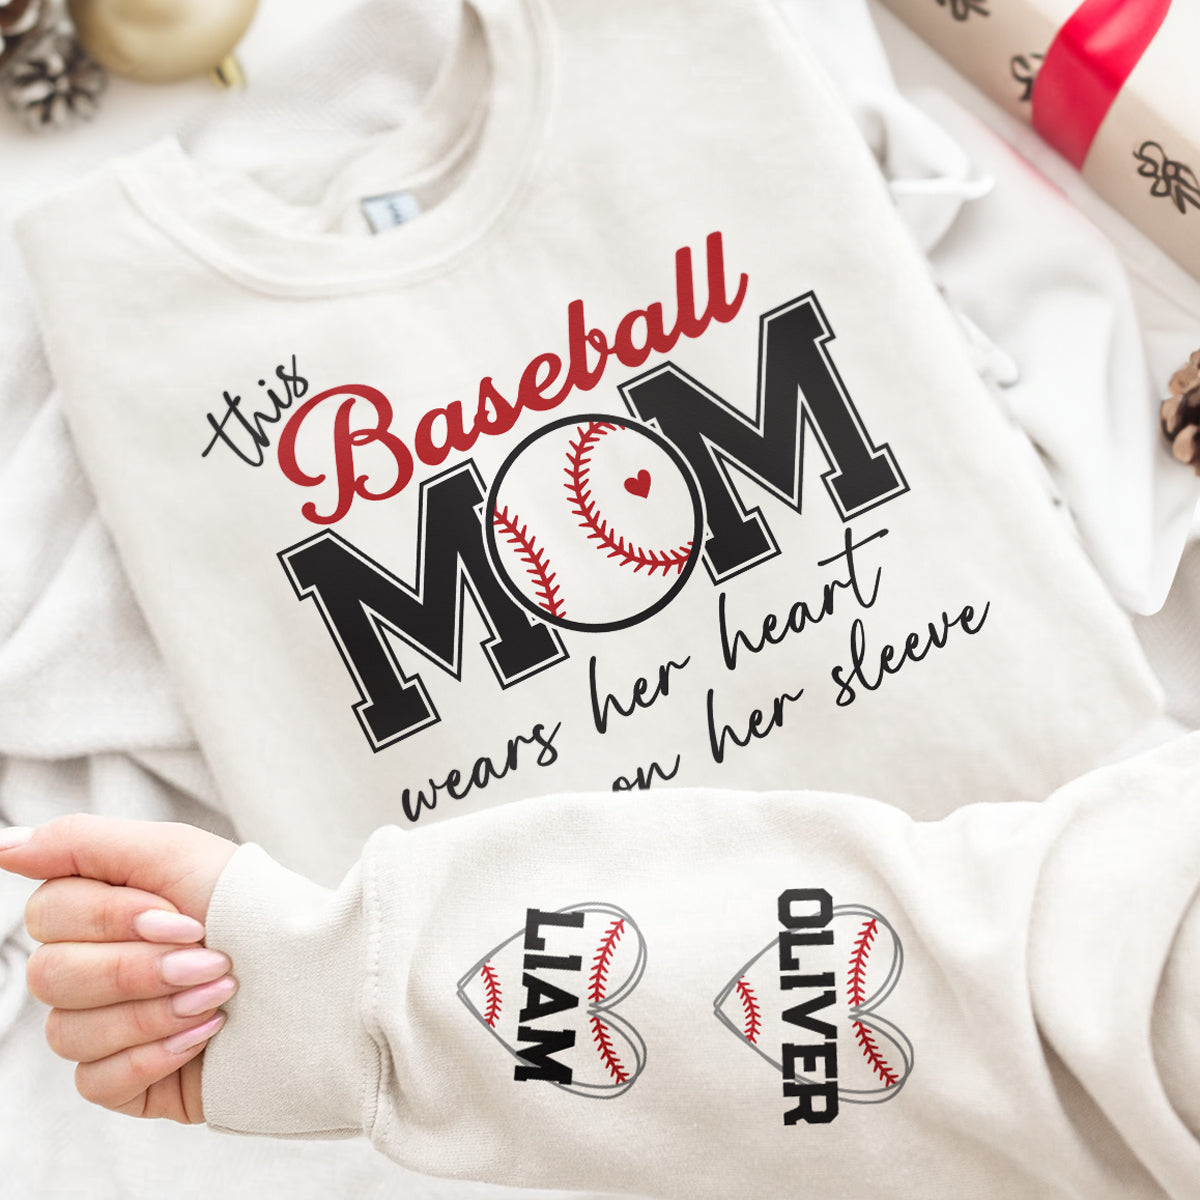 This Baseball Mom Wear Her Heart On Her Sleeve - Gift For Mom - Personalized Sleeve Sweatshirt